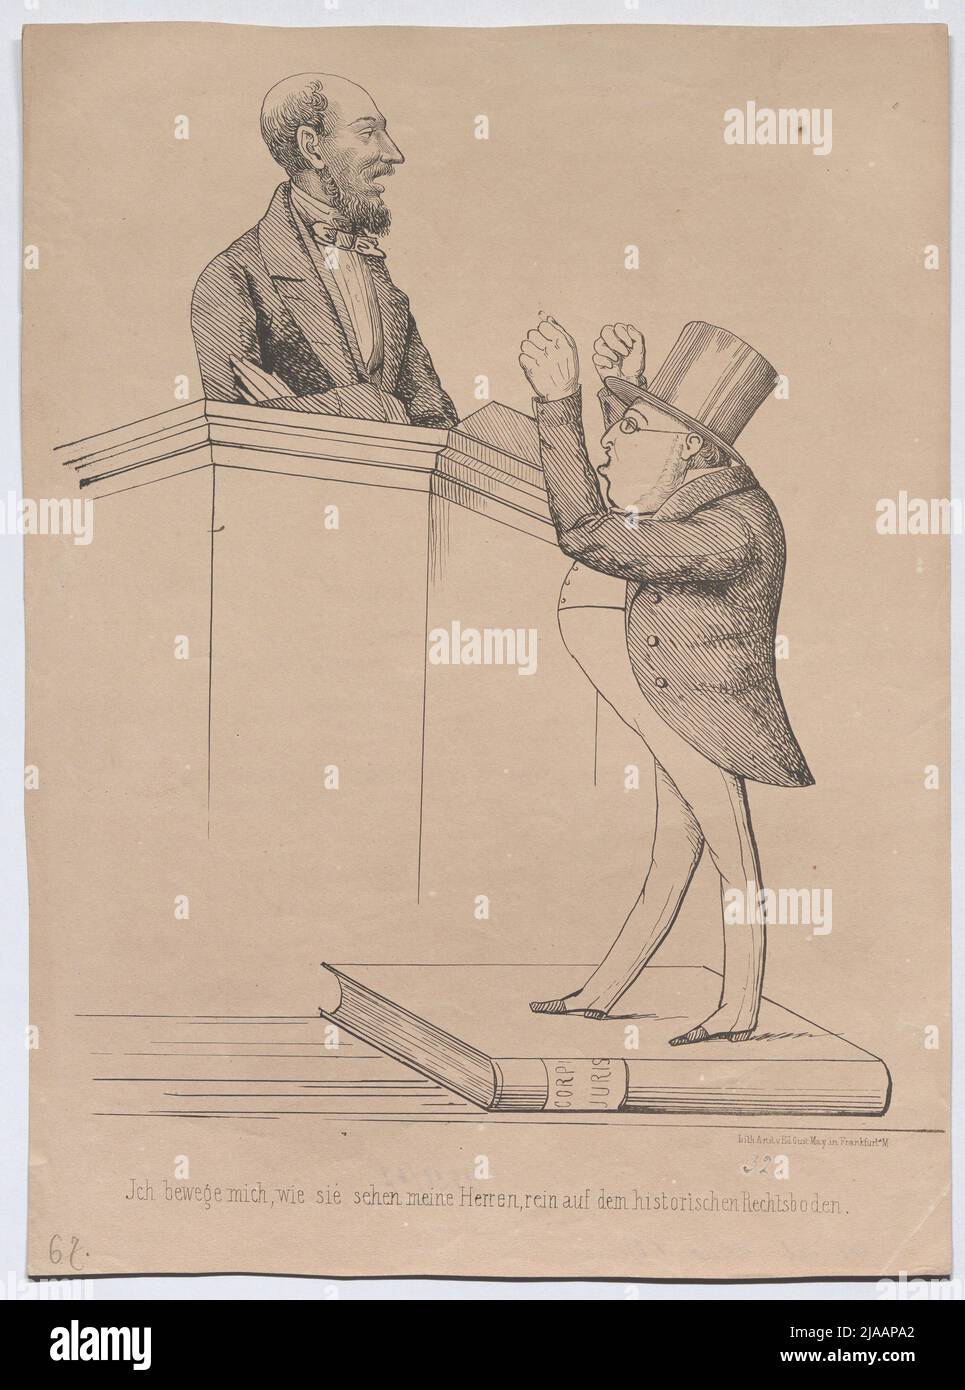 'I move as you see, gentlemen, purely on the historical / right floor.' (Caricature on Lorenz Brentano and Georg von Vincke, MP of the National Assembly in Frankfurt 1848). Gerhard Malß (1819-1885), Lithographer, Eduard Gustav May (1818-1907), publisher Stock Photo